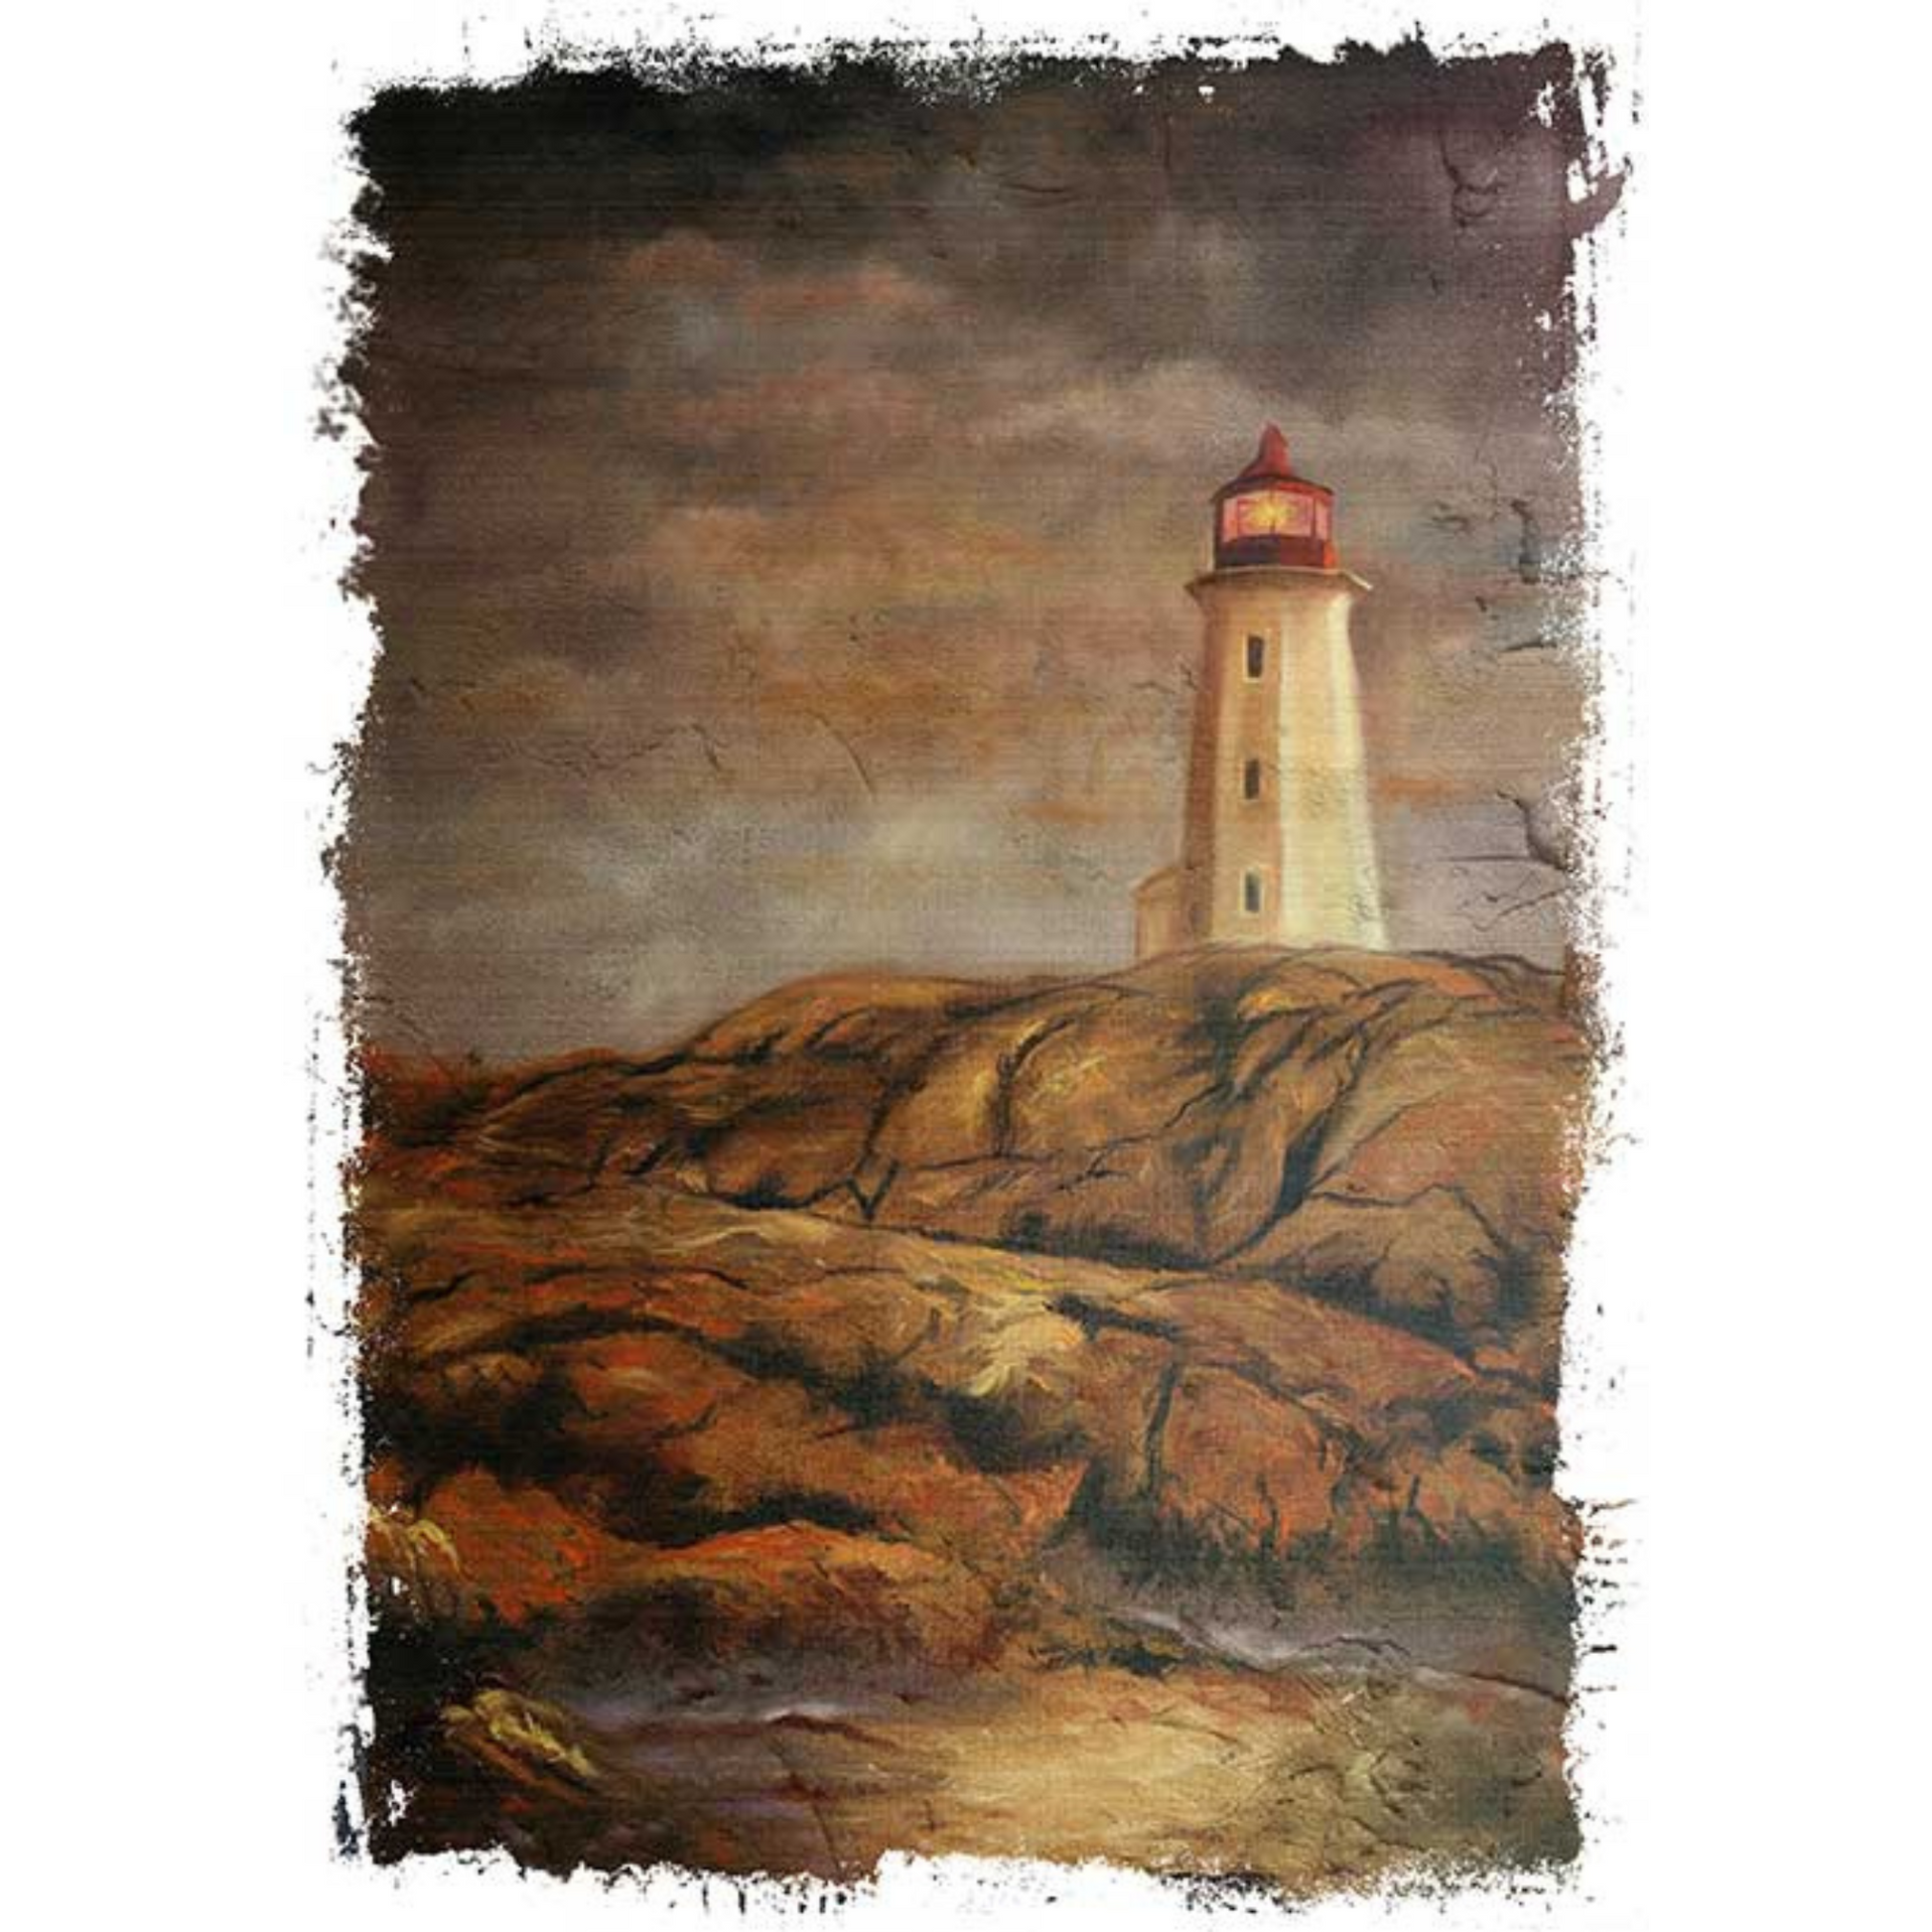 "Lighthouse" decoupage rice paper by Paper Designs available at Milton's Daughter. Available in large fomrat Size A1.